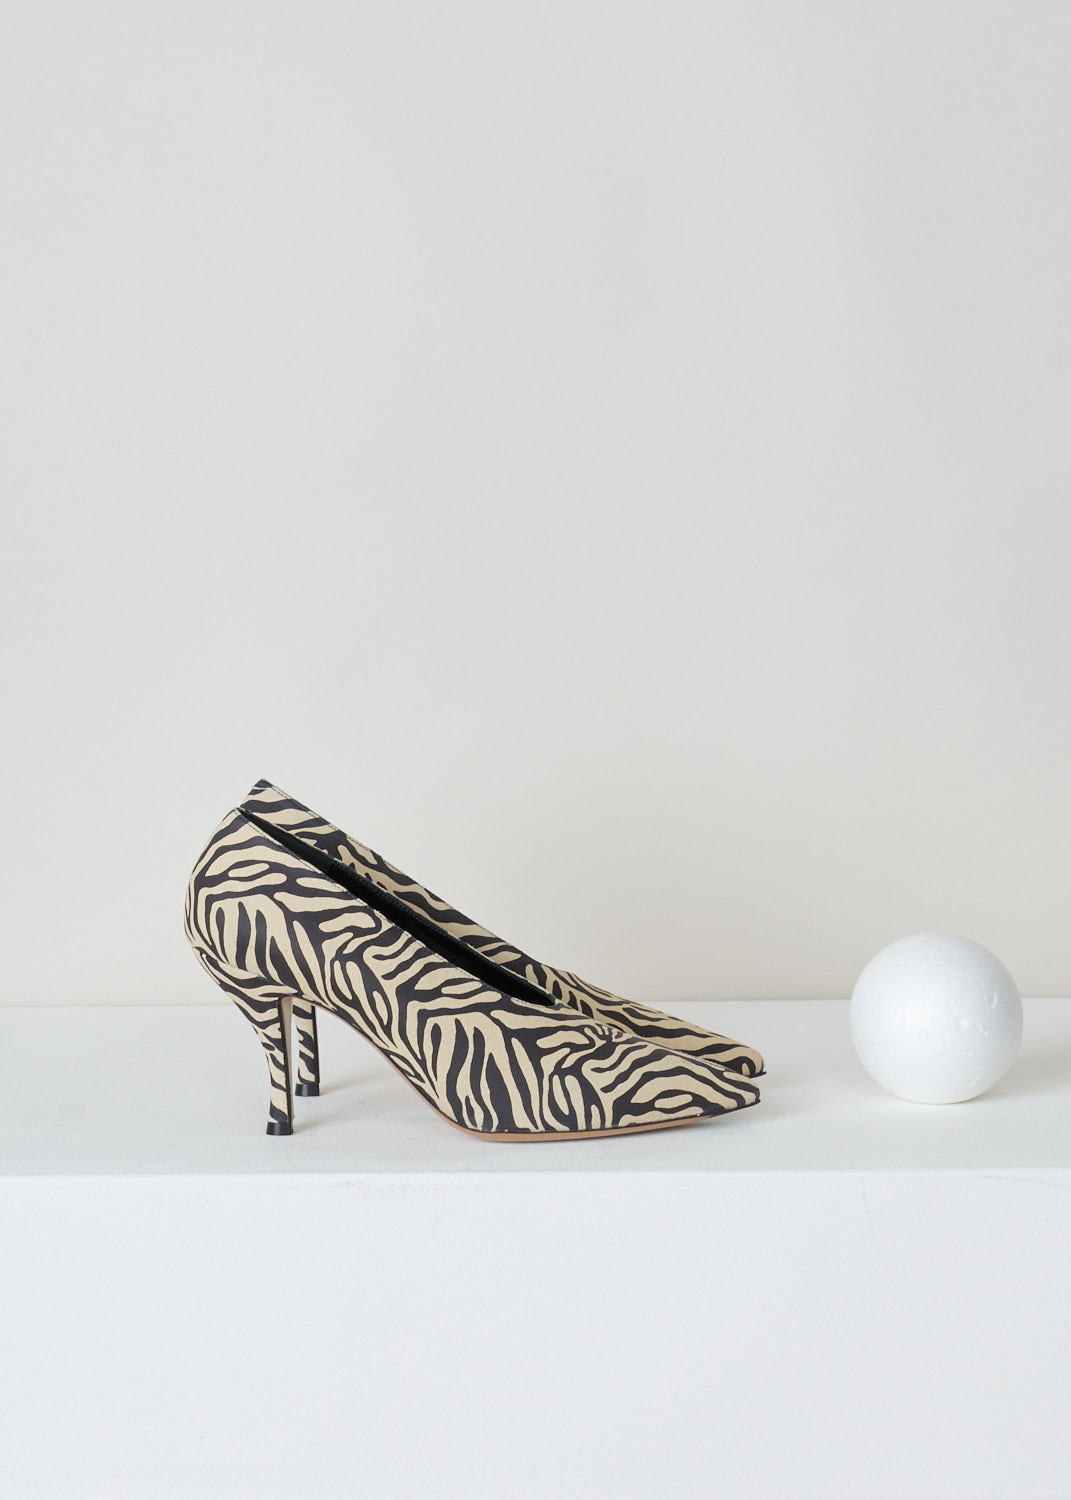 B O T T E G A V E N E T A Pumps - Zebra print leather with 10 cm heel  (excellent condition) Size 39.5 Price $200 🔺 Pre-owned and aut... |  Instagram